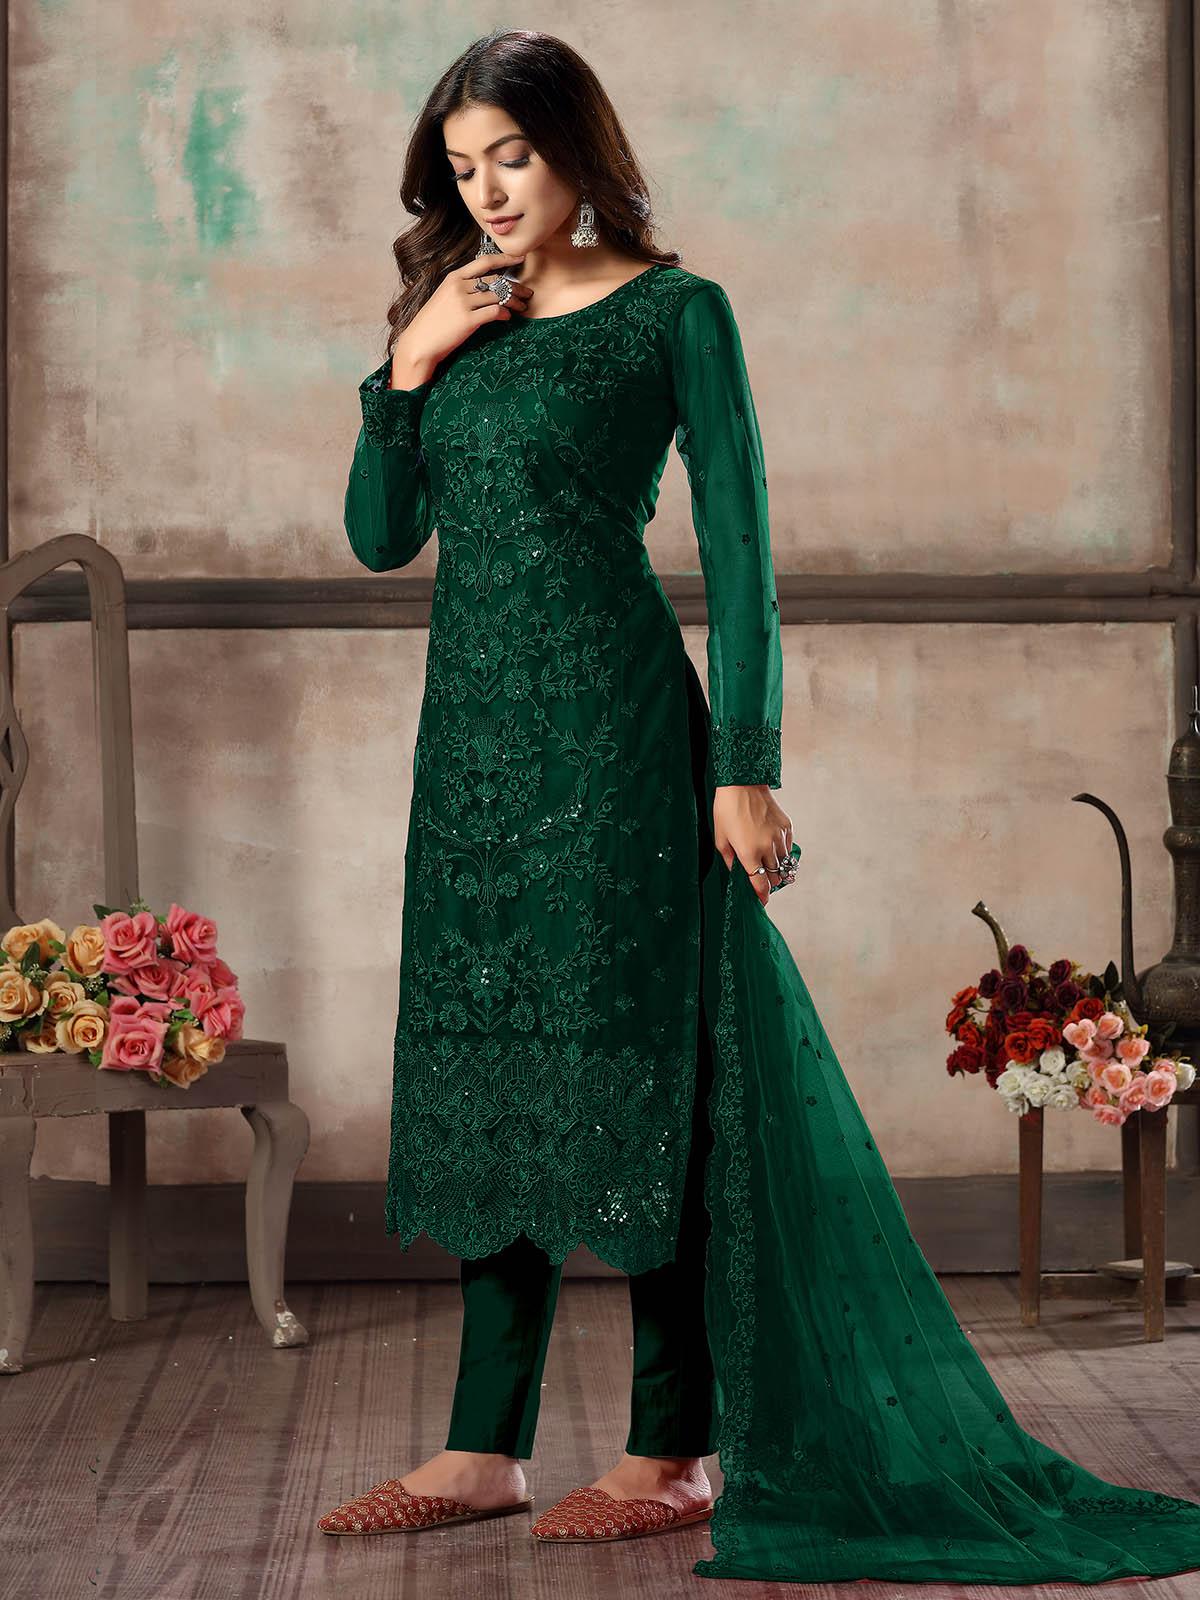 Buy VISHWAM Womens Unstitched Green Cigarette Pant Dress Salwar Suit  Materials at Amazon.in